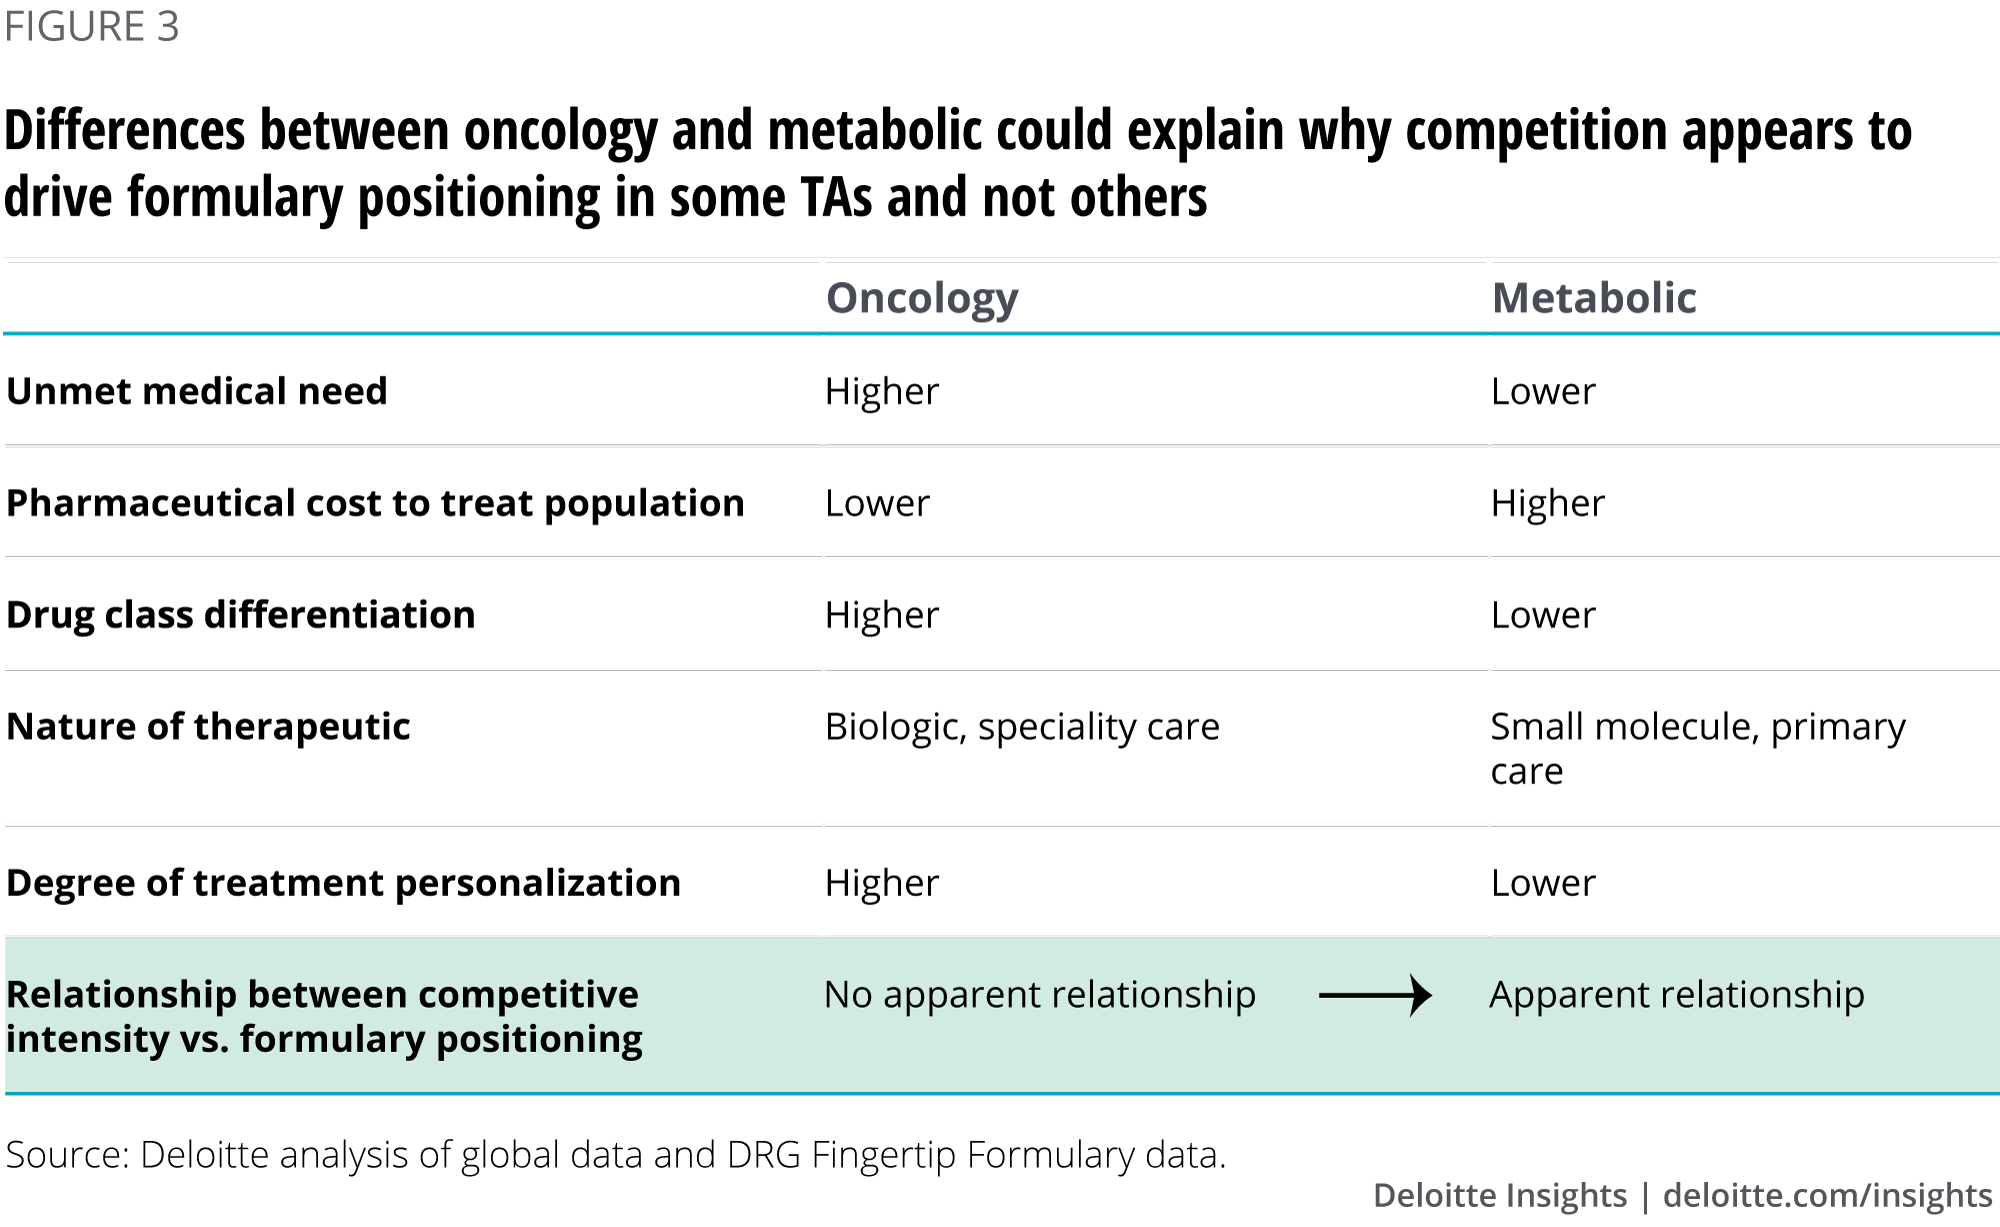 Differences between oncology and metabolic could explain why competition appears to drive formulary positioning in some TAs and not others